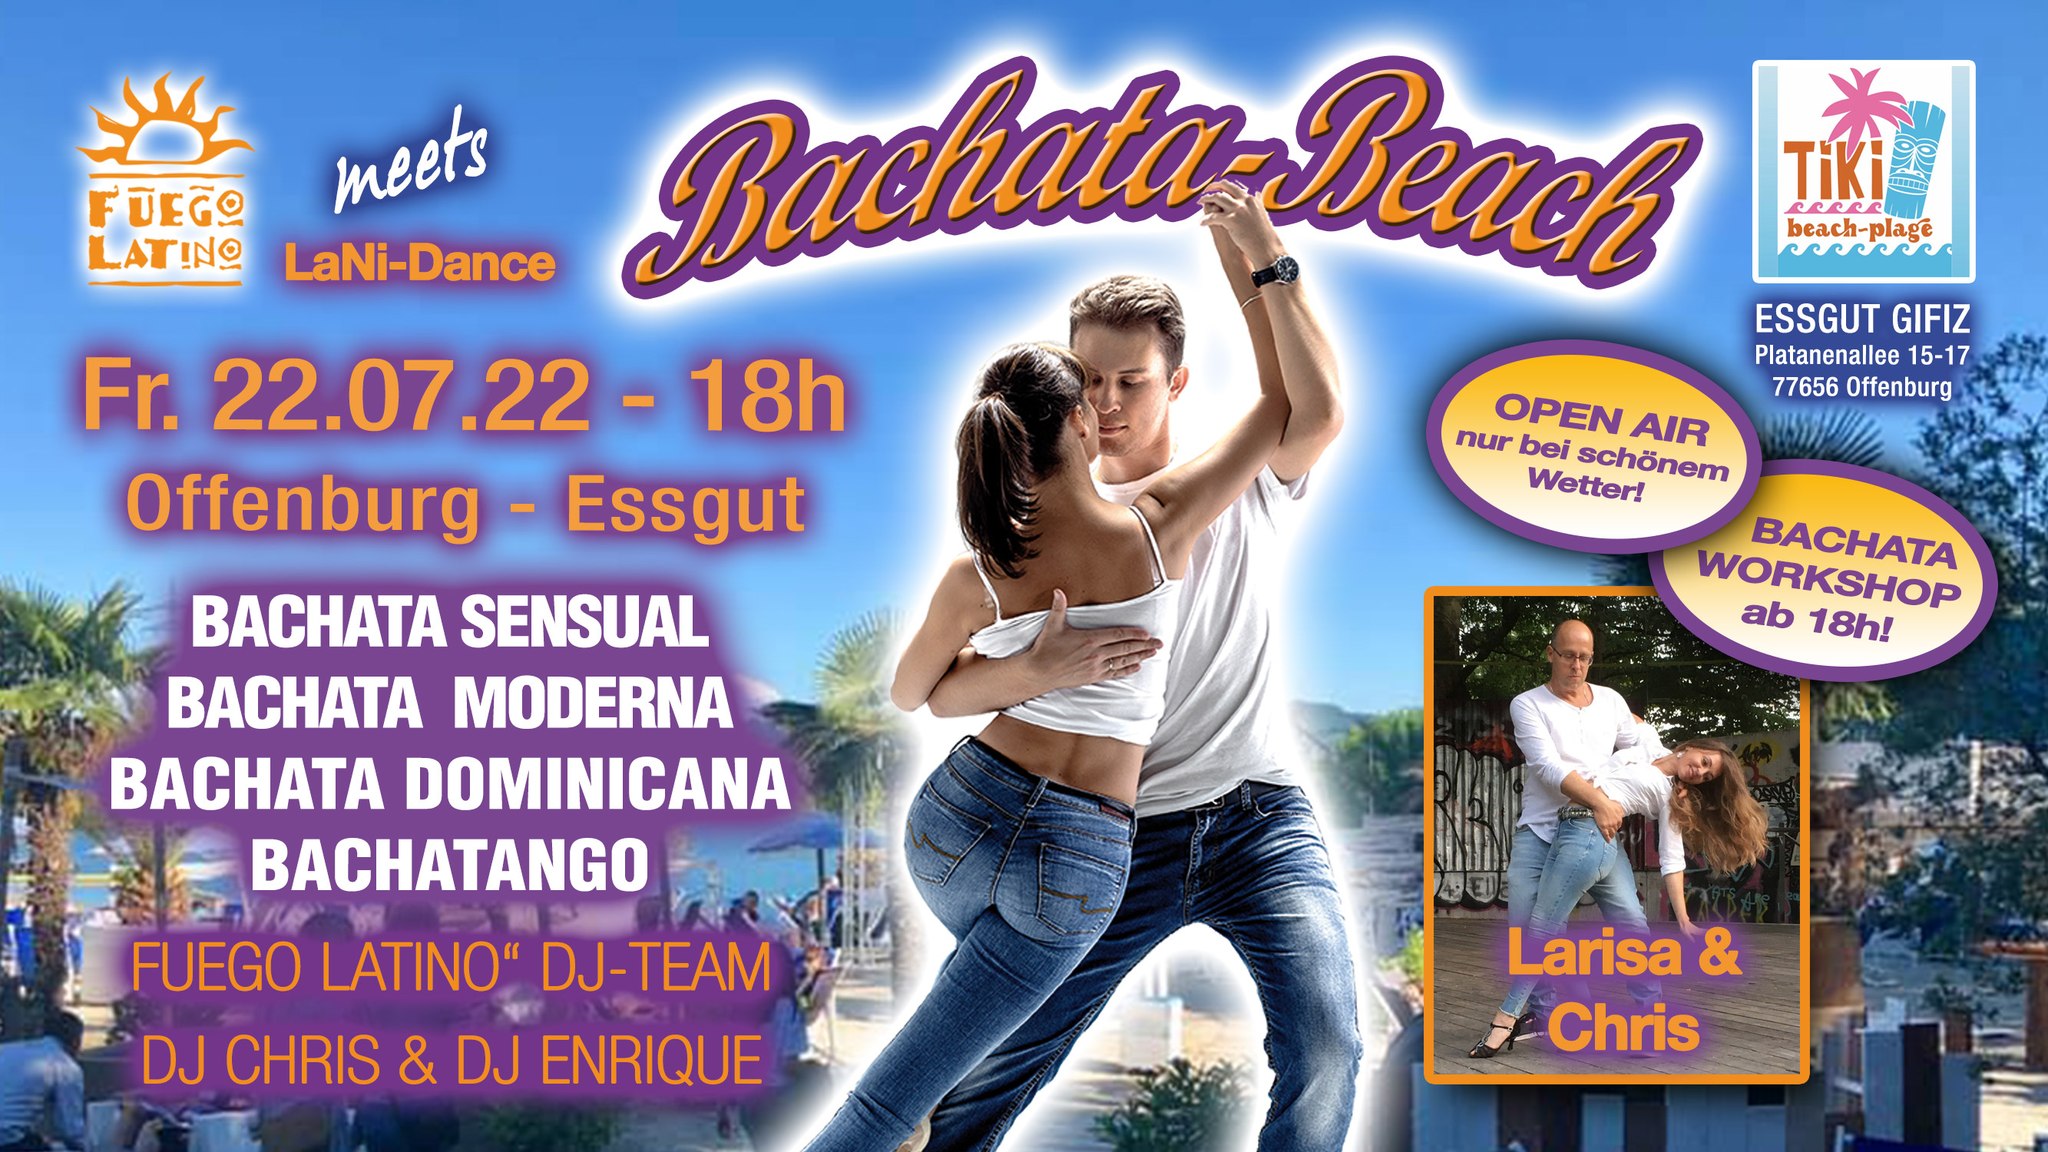 You are currently viewing BACHATA-BEACH-Open Air in Offenburg abgesagt!